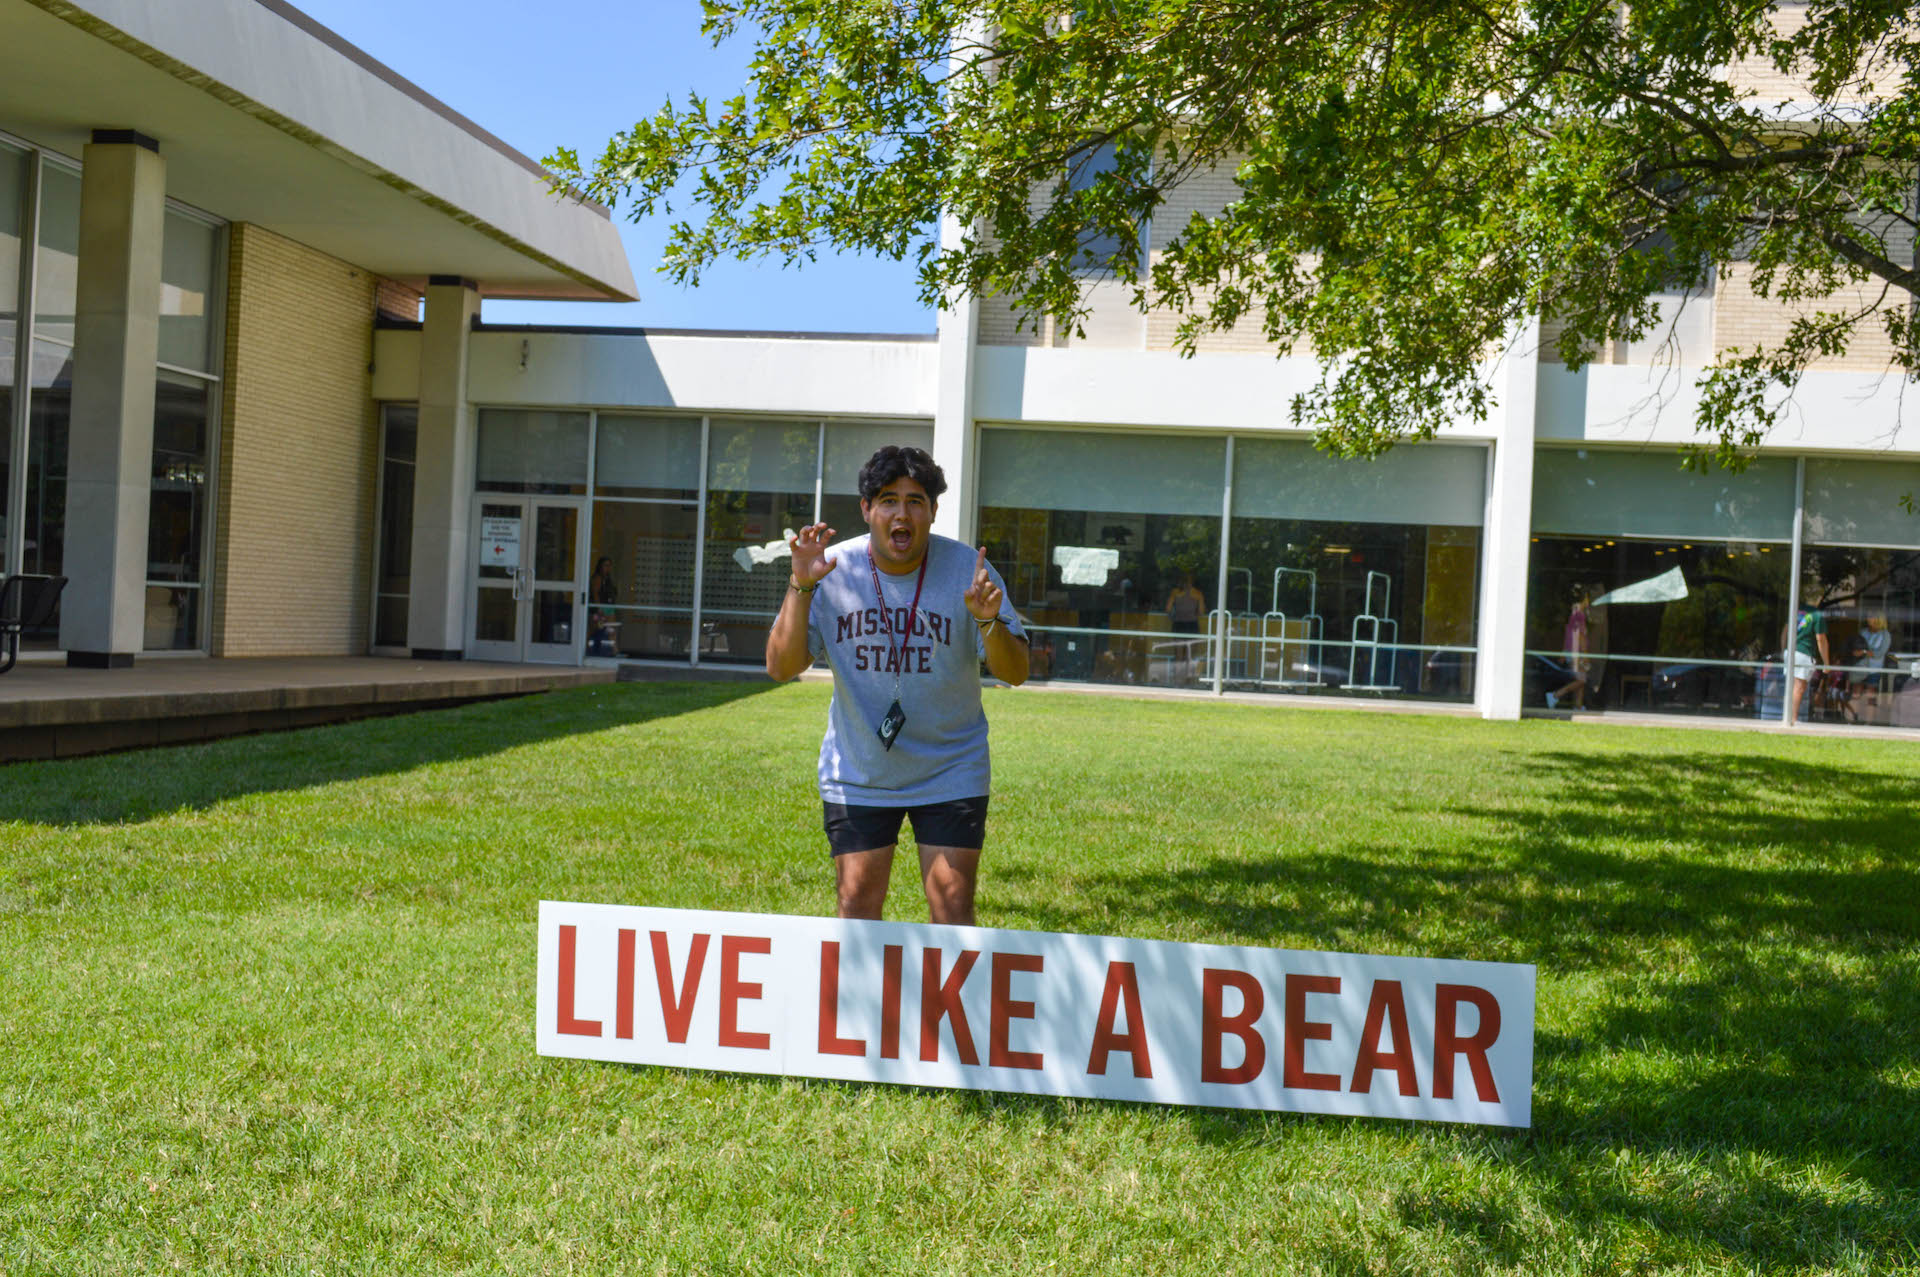 person smiling in front of Live Like a Bear sign